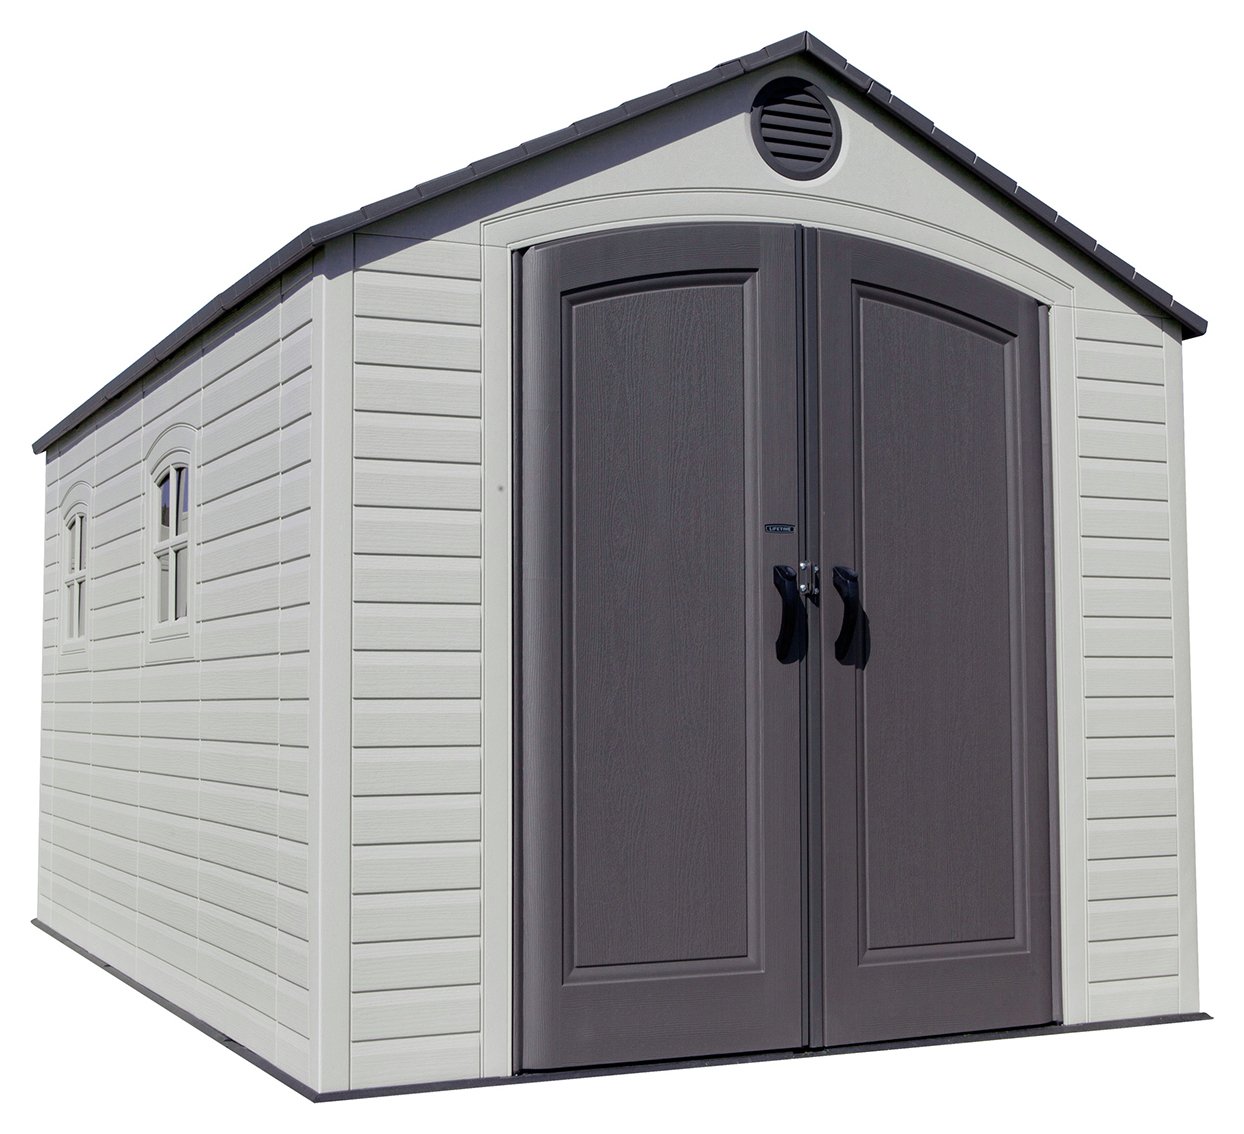 Lifetime 8x15ft Plastic Outdoor Storage Shed